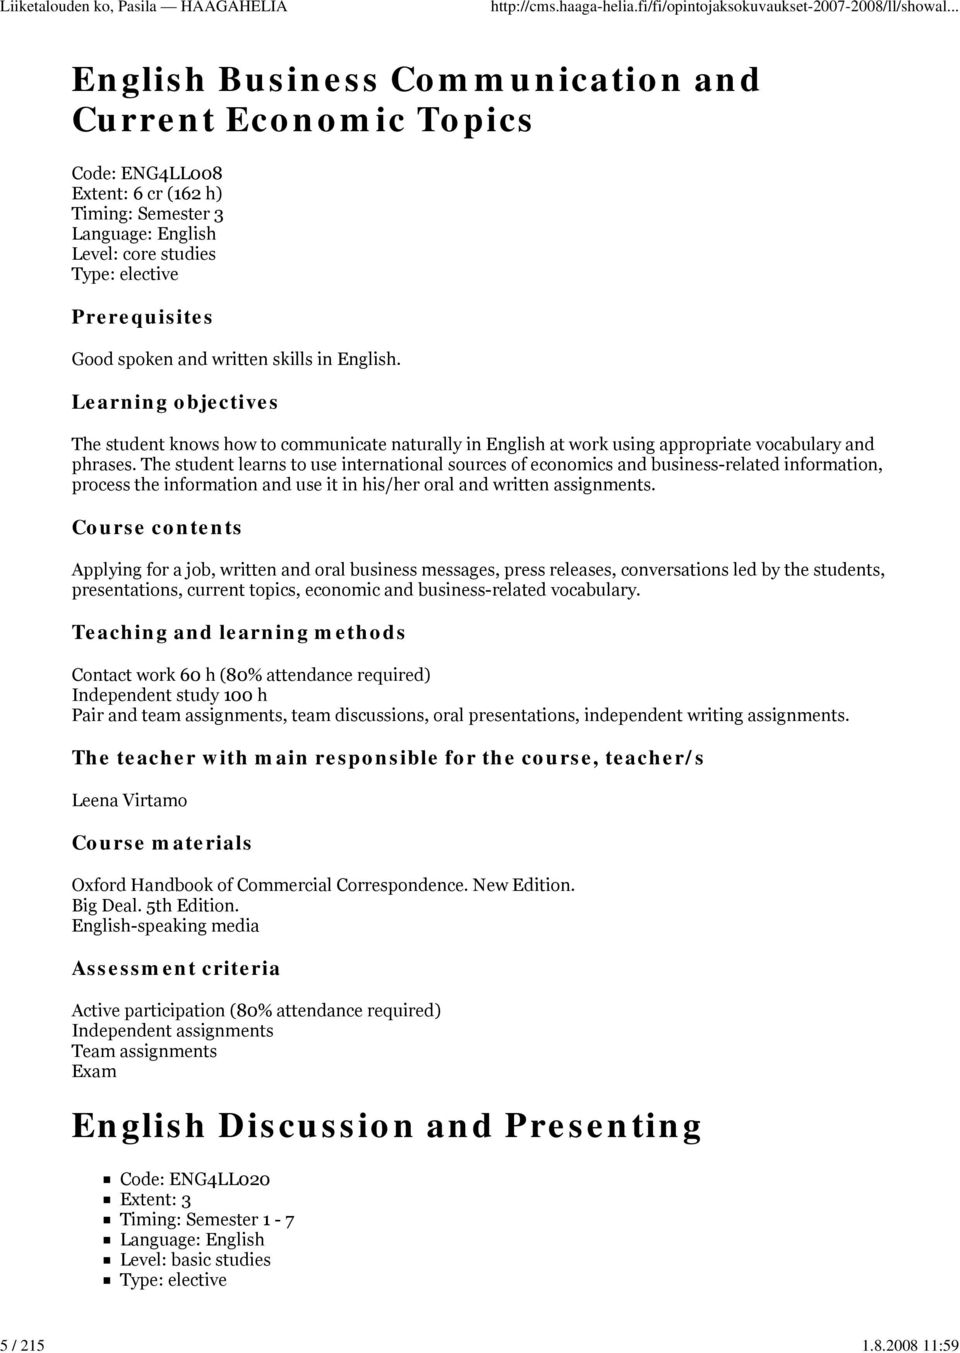 spoken and written skills in English. Learning objectives The student knows how to communicate naturally in English at work using appropriate vocabulary and phrases.